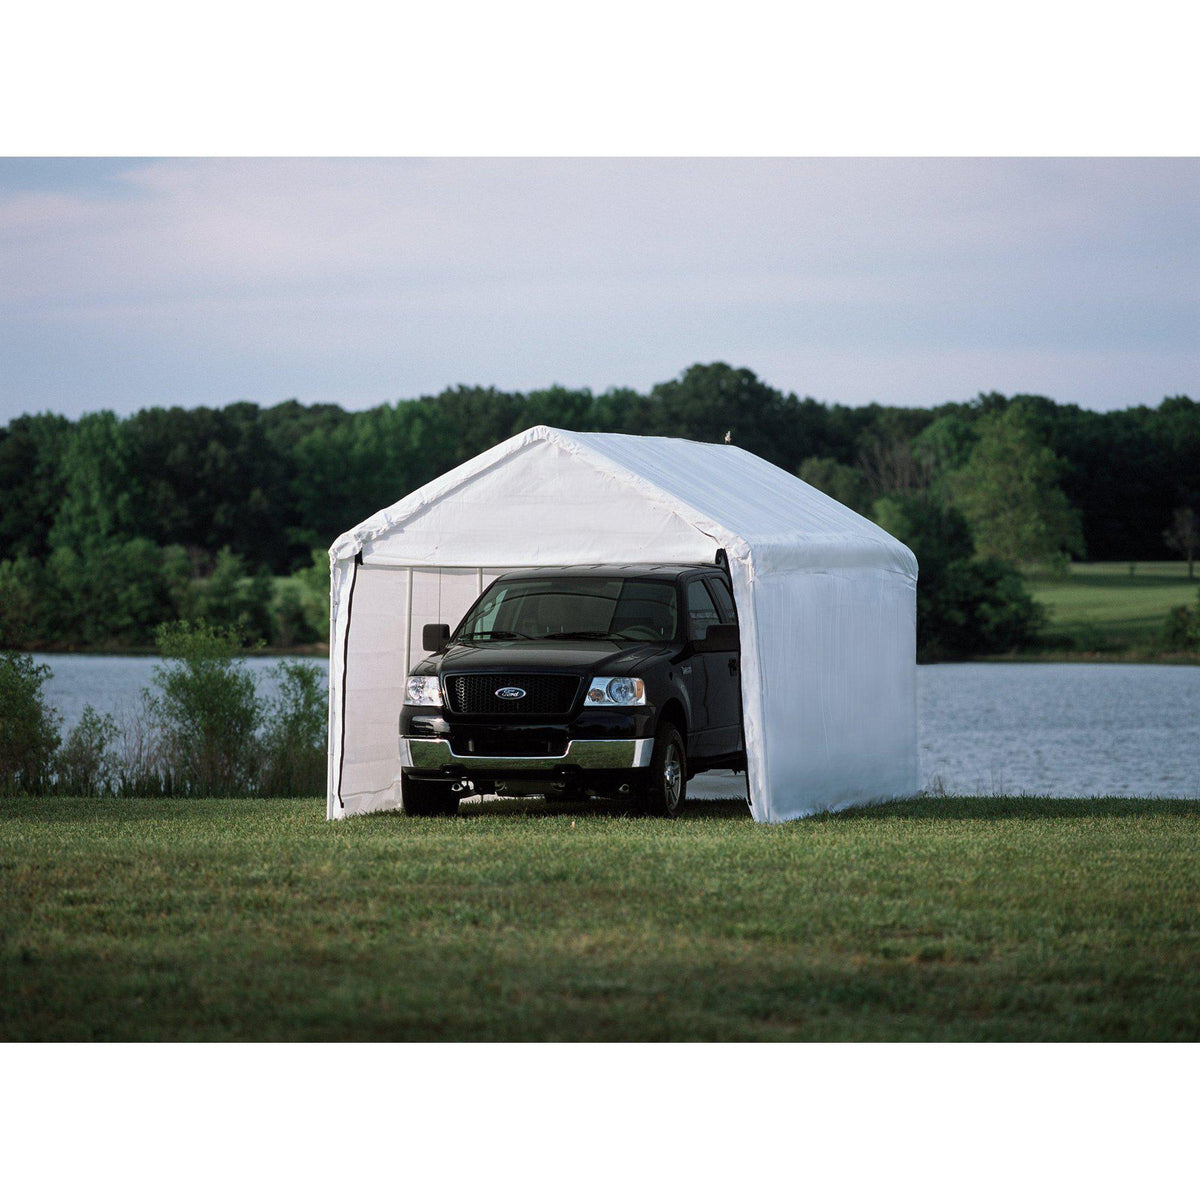 ShelterLogic MaxAP Canopy Enclosure Kit, 10 x 20 ft. (Frame and Canopy Sold Separately)